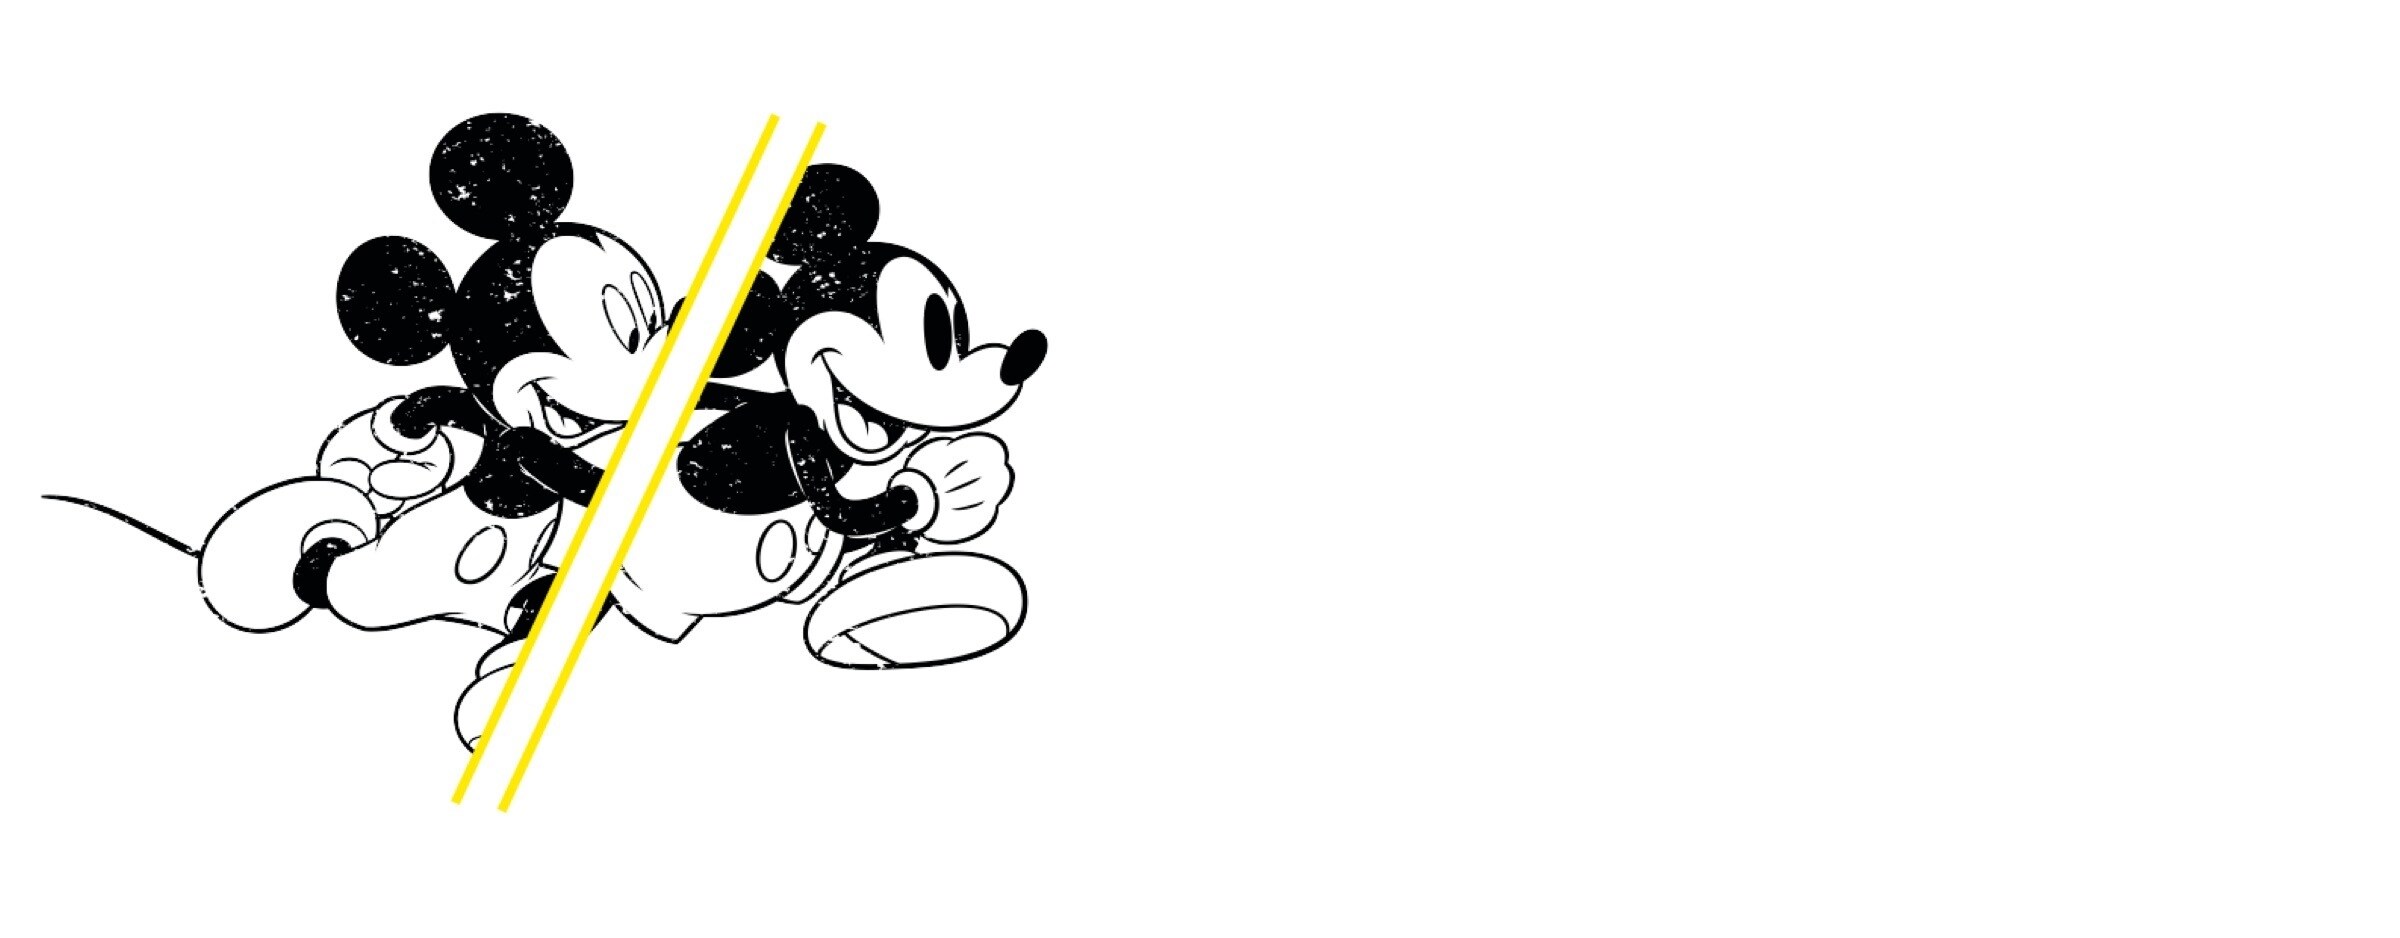 Mickey 90 | Celebrate 90 years of the 'True Original' Mickey Mouse